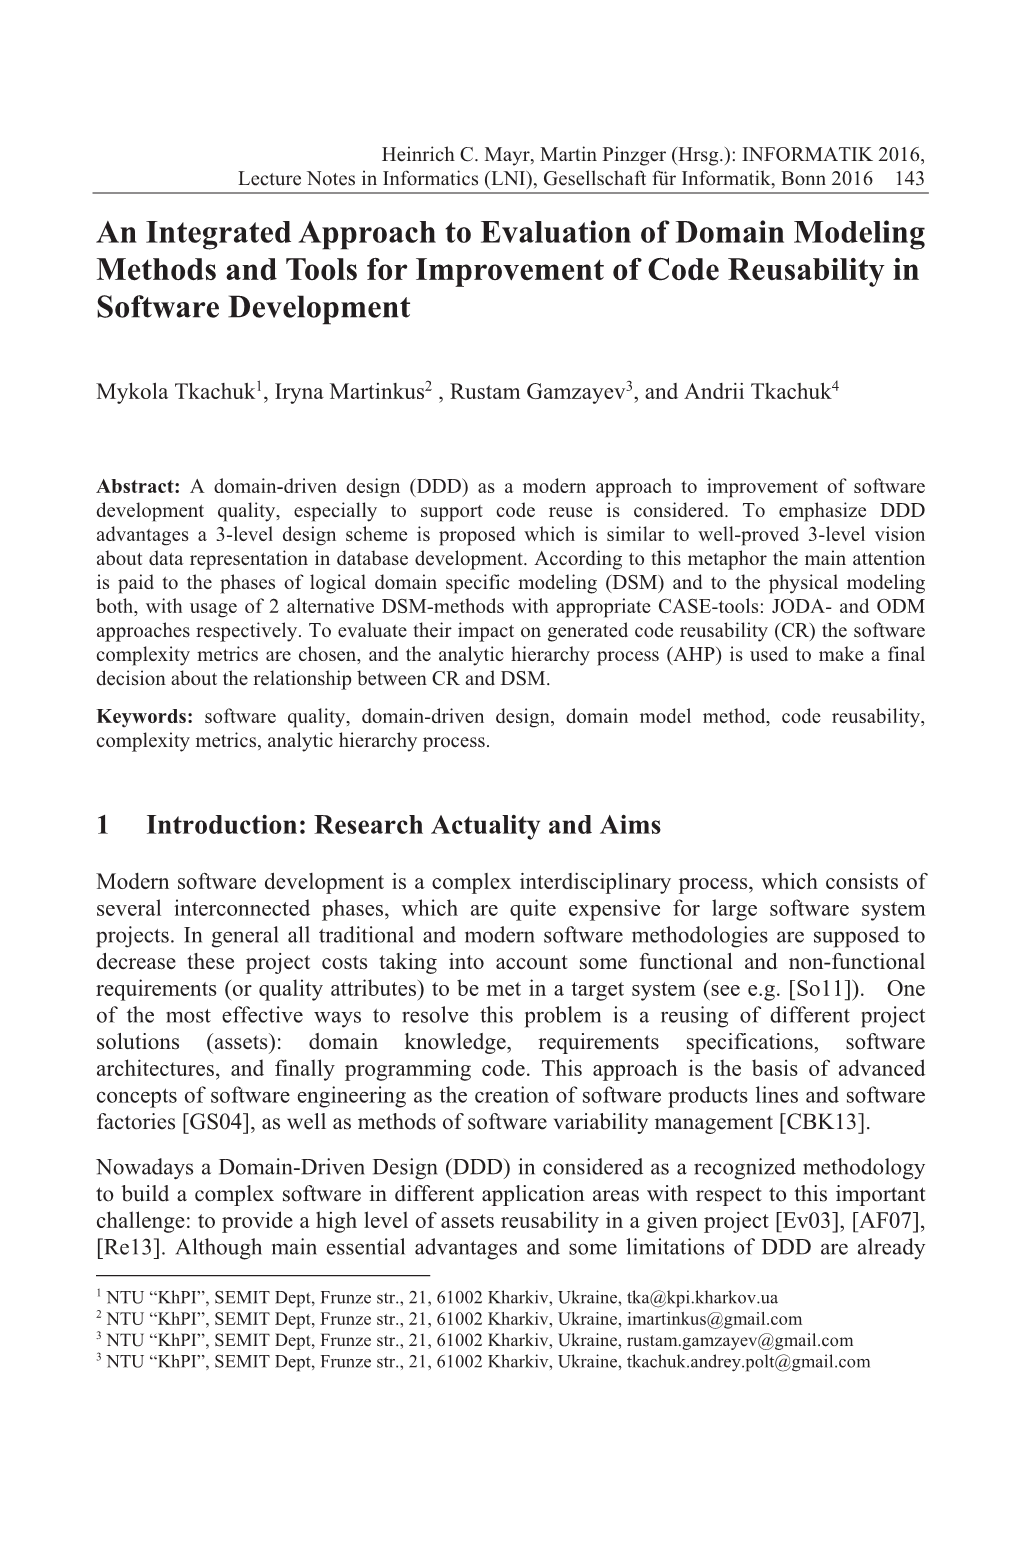 An Integrated Approach to Evaluation of Domain Modeling Methods and Tools for Improvement of Code Reusability in Software Development